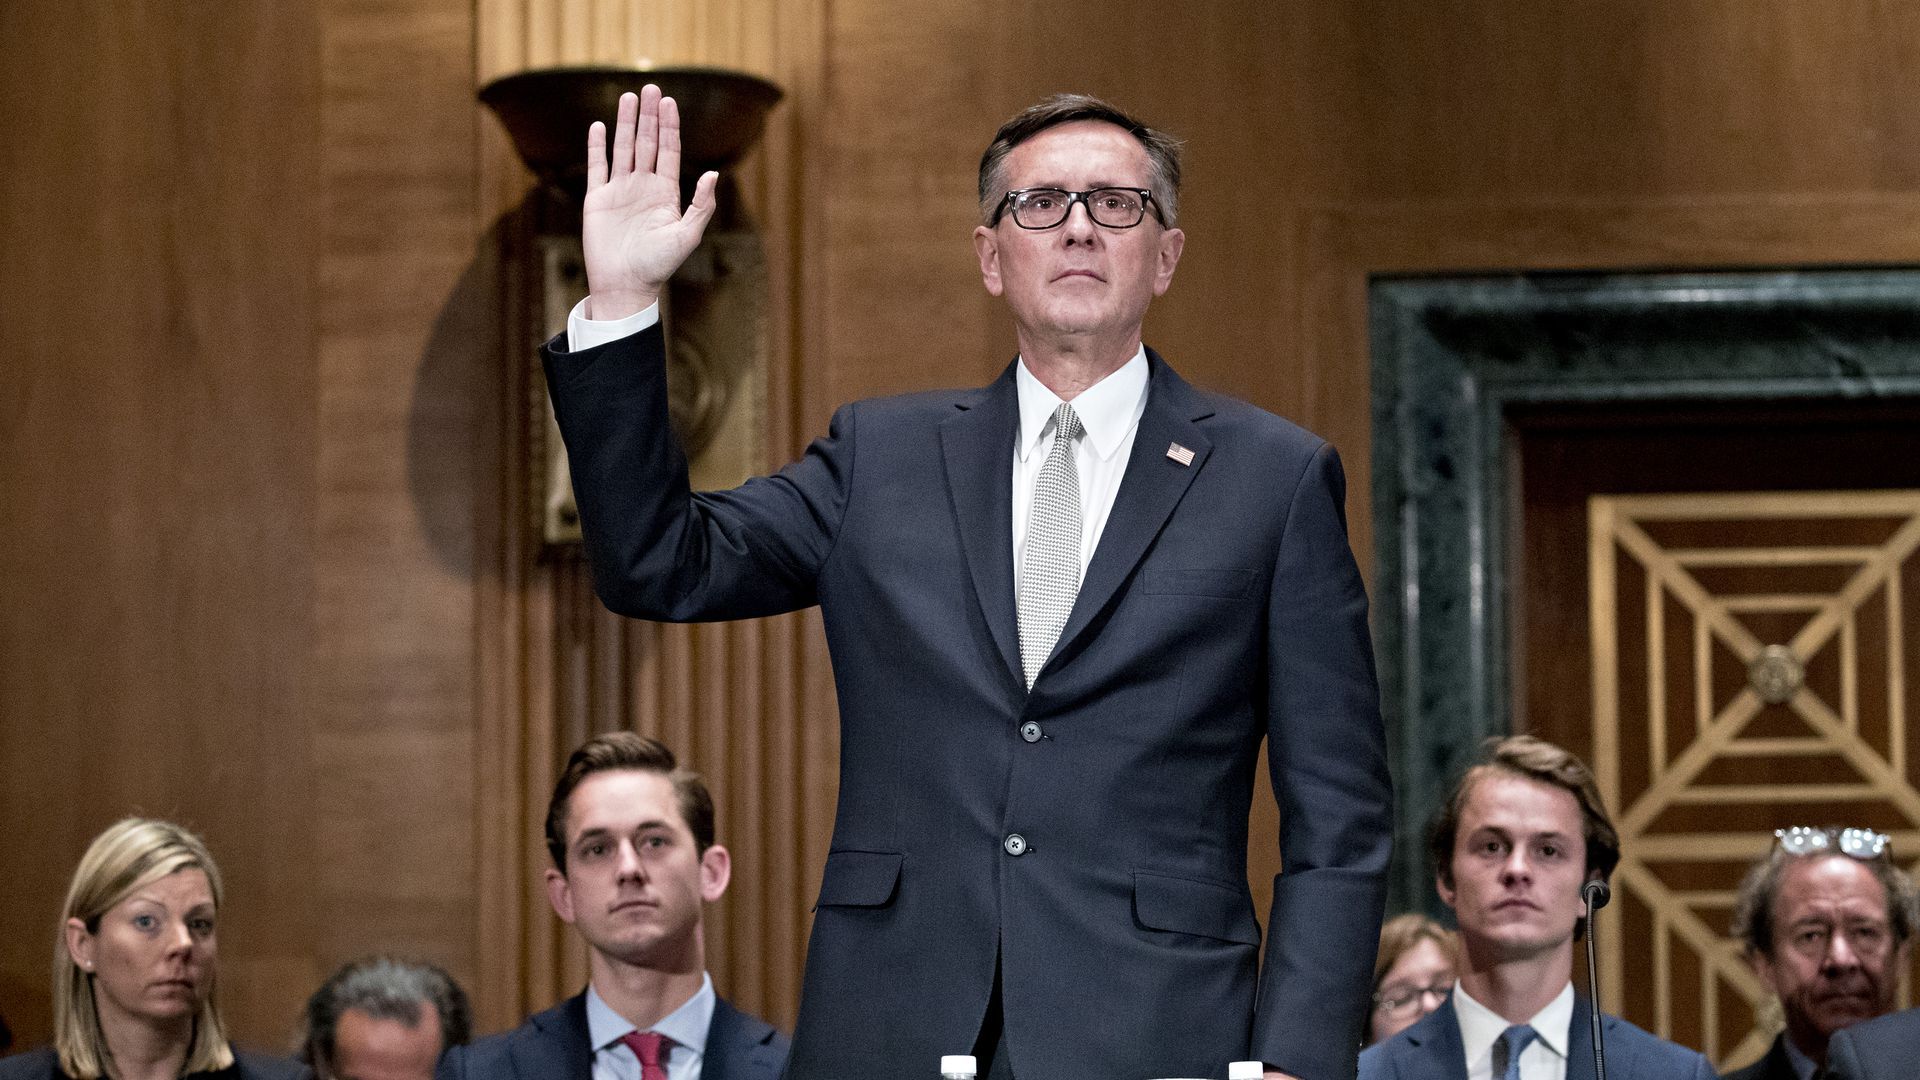 Outgoing Fed vice-chair Richard Clarida at his 2018 confirmation hearing. Andrew Harrer/Bloomberg via Getty Images